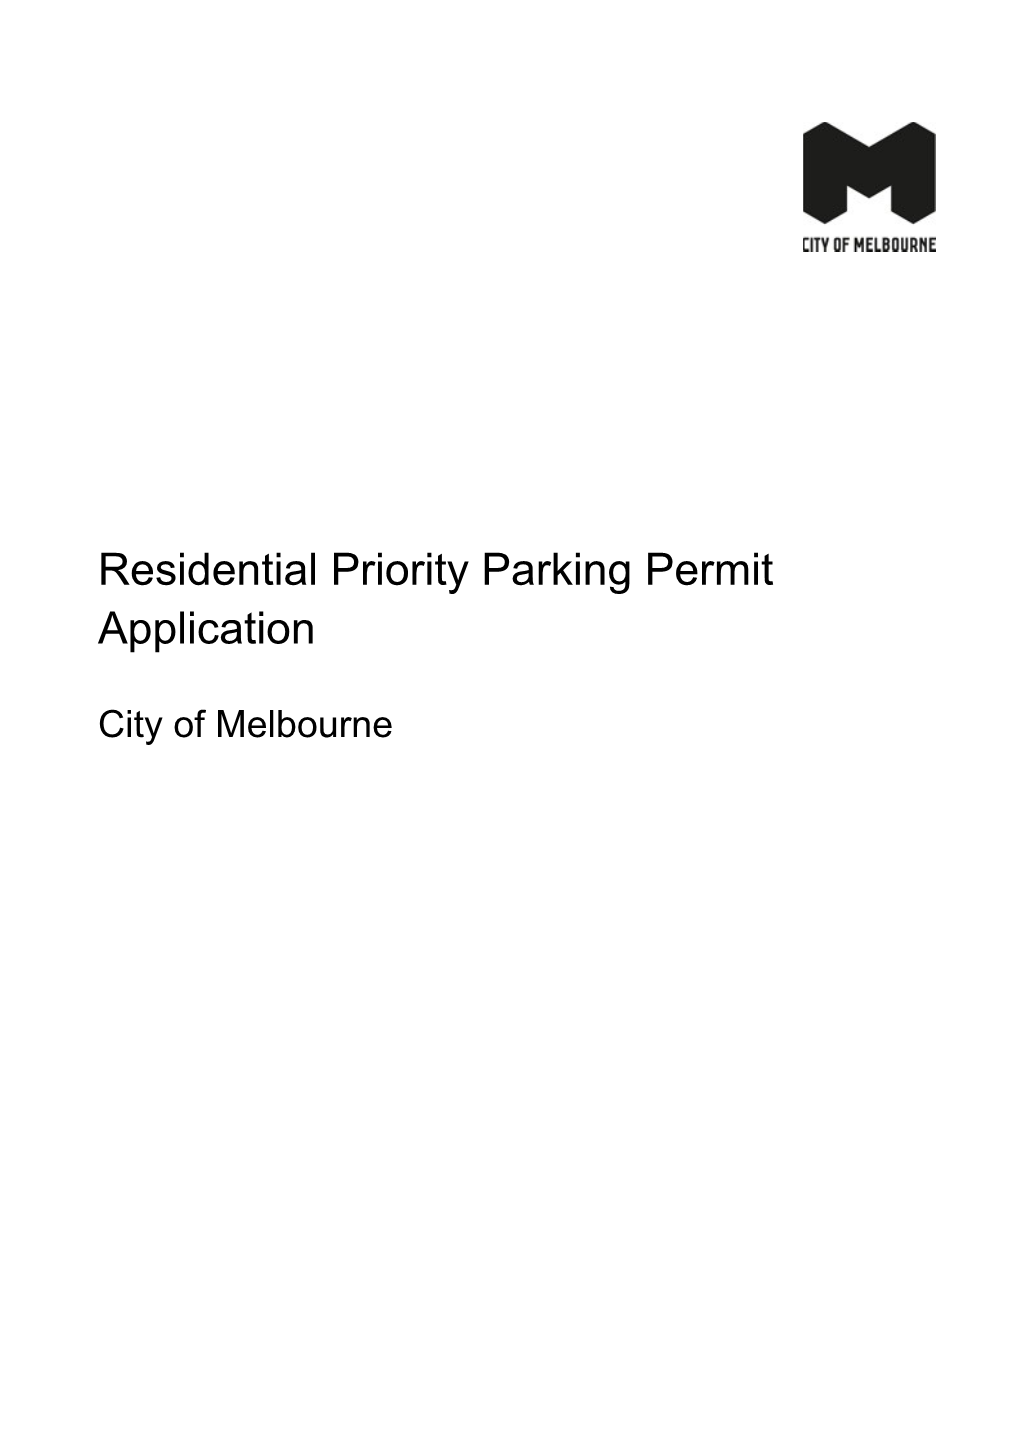 Residential Priority Parking Permit Application